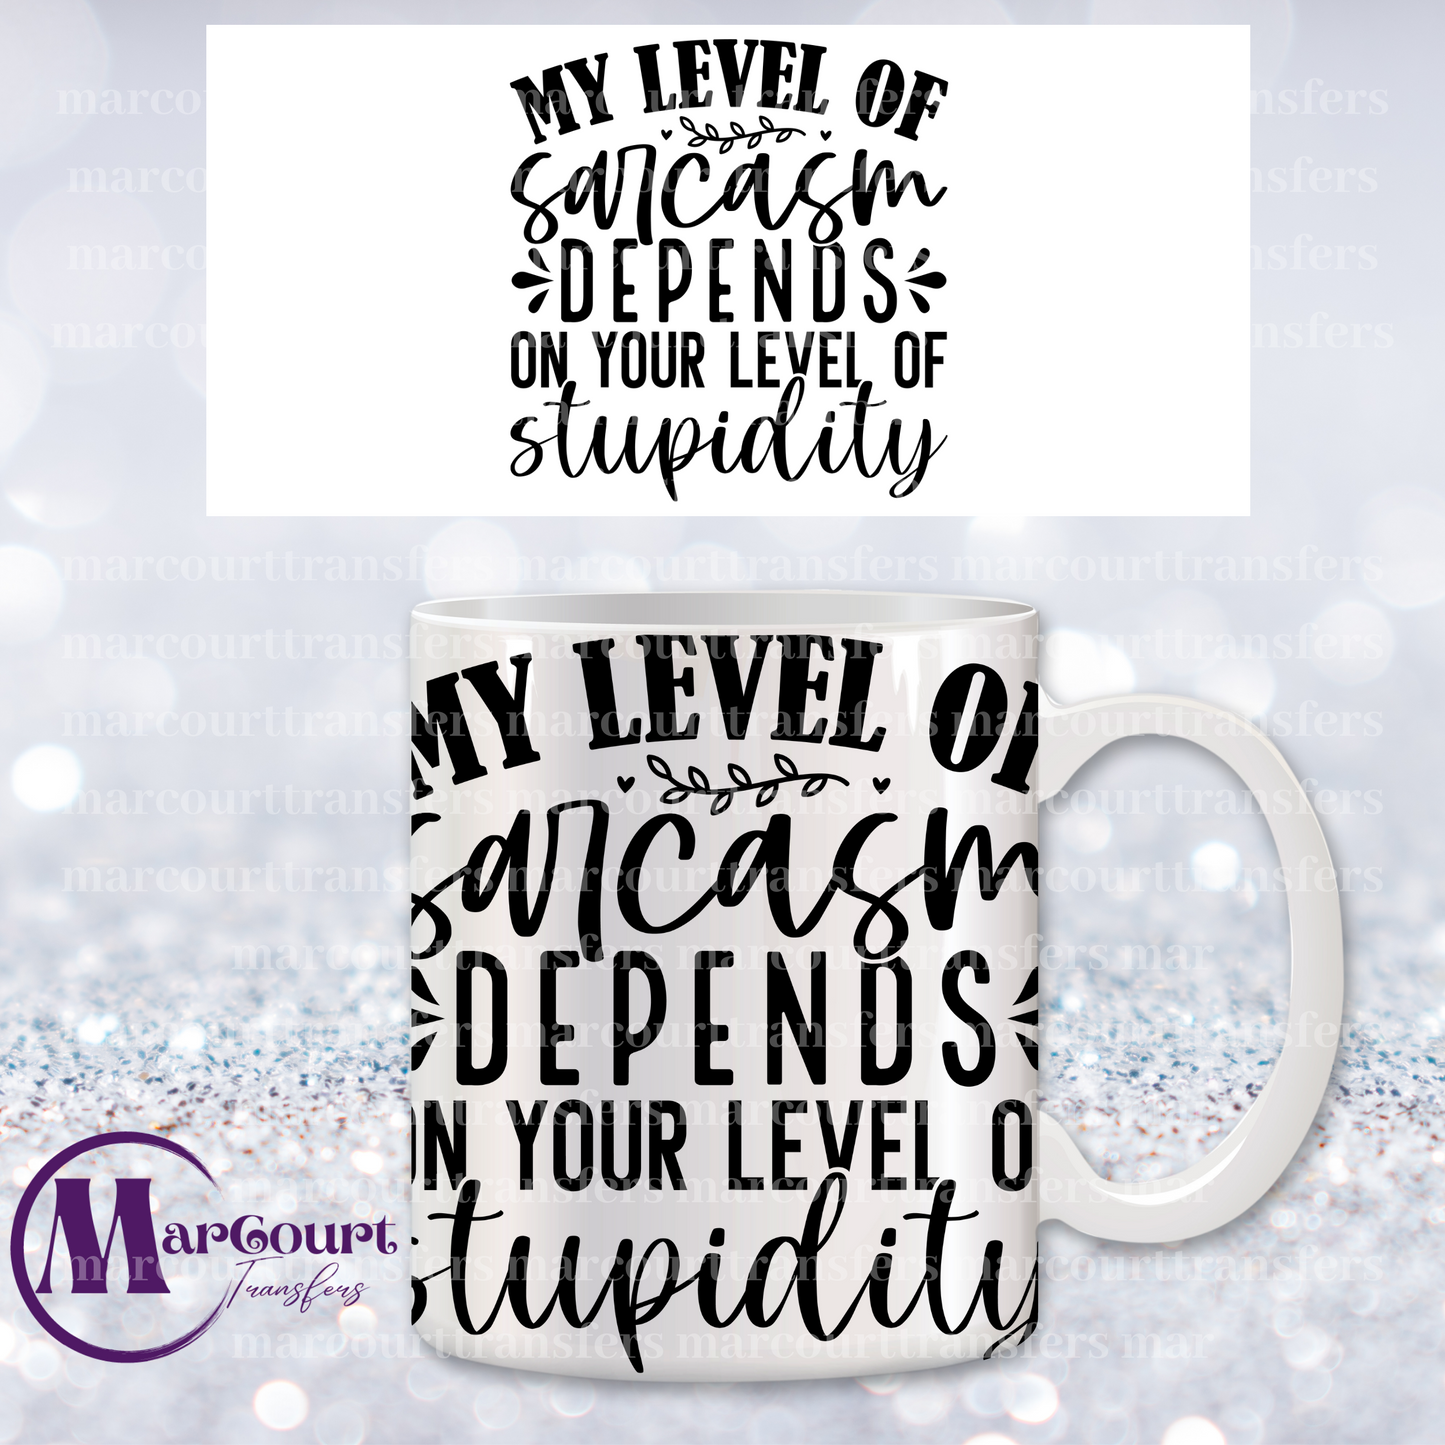 MY LEVEL OF SARCASM DEPENDS ON YOUR LEVEL OF STUPIDITY-MUG TRANSFER